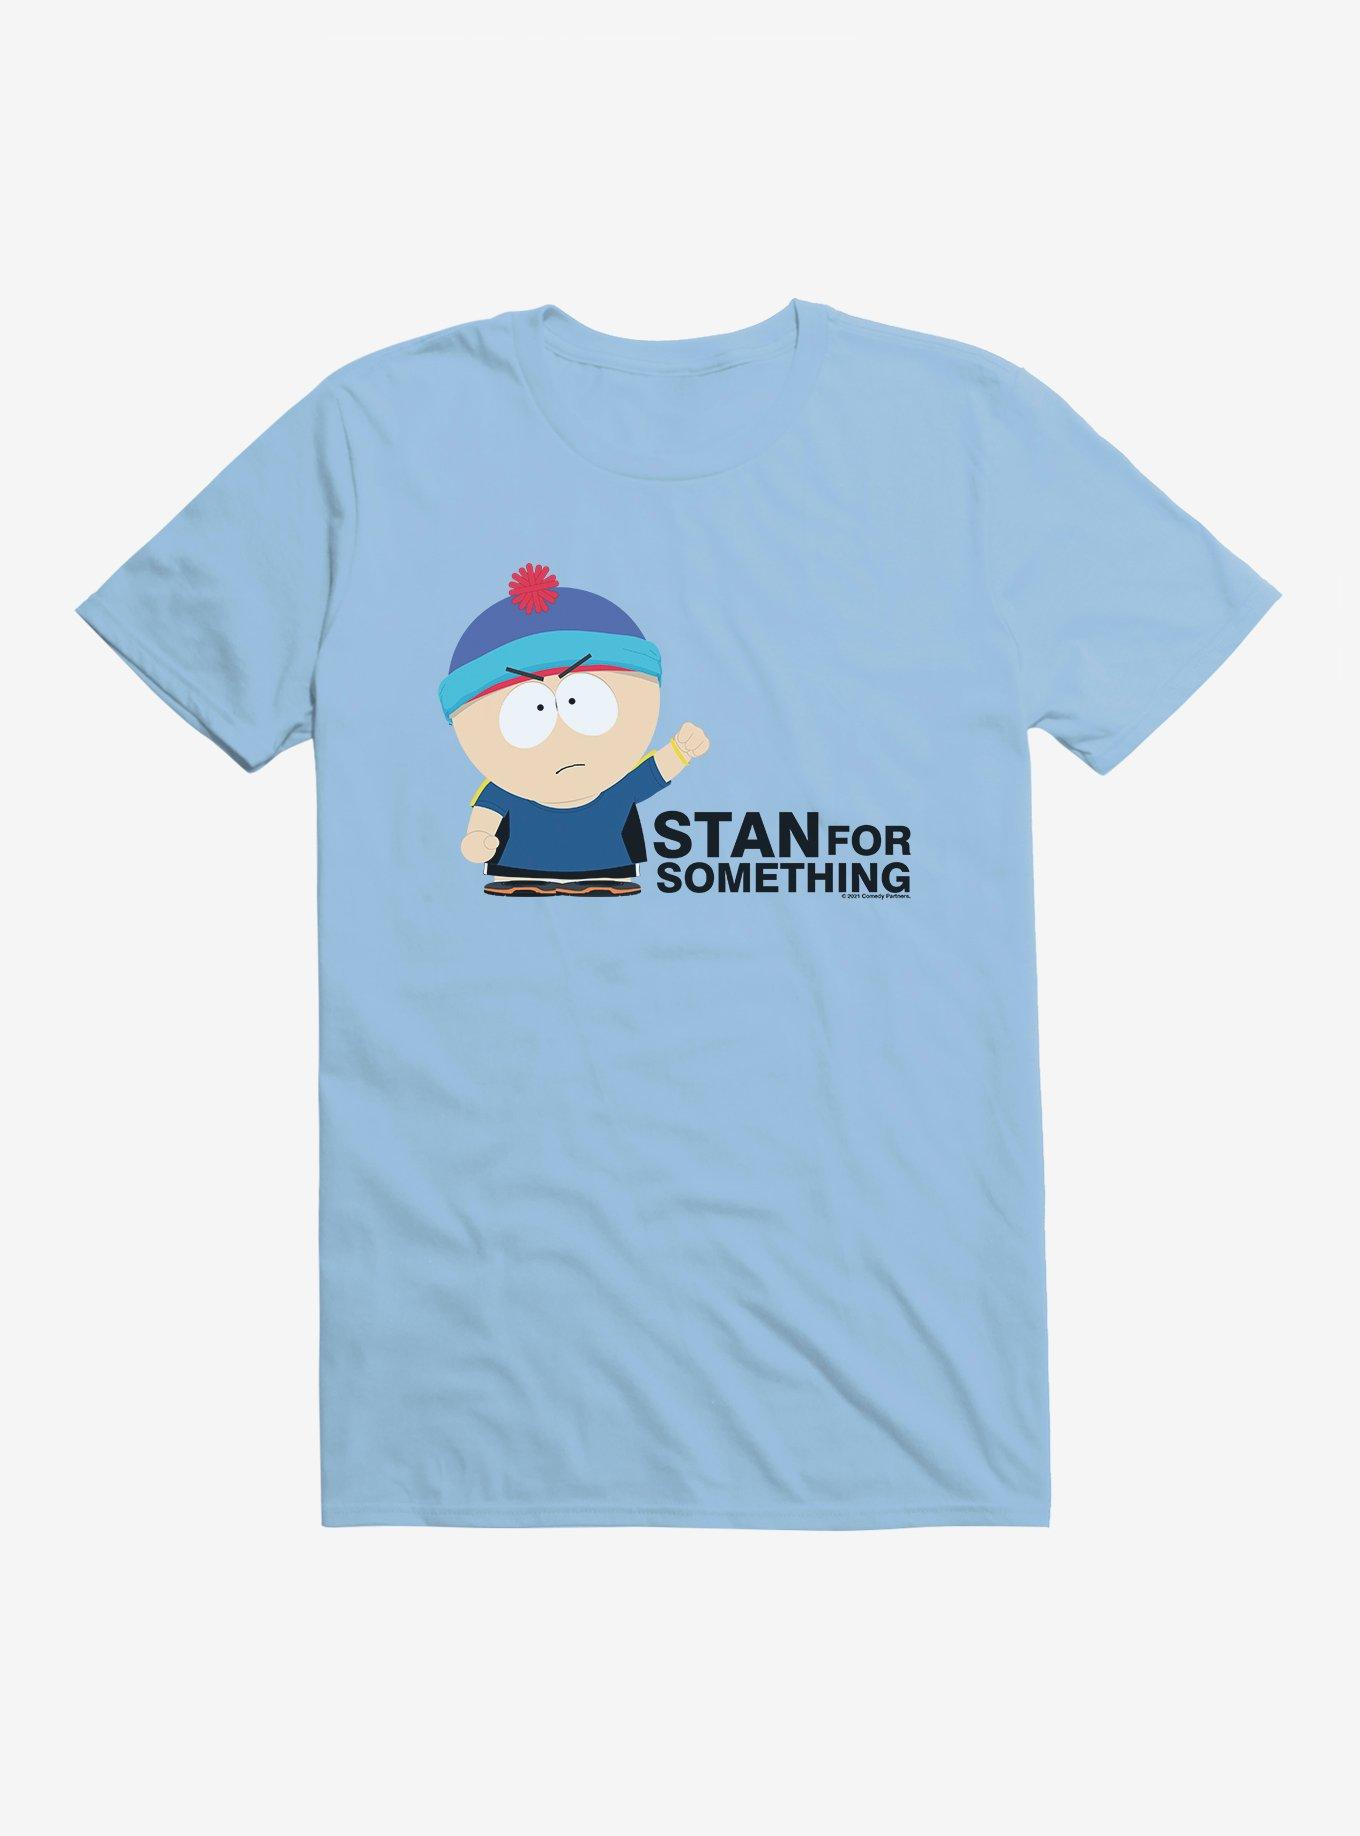 South Park Season Reference Stan For Something T-Shirt, LIGHT BLUE, hi-res